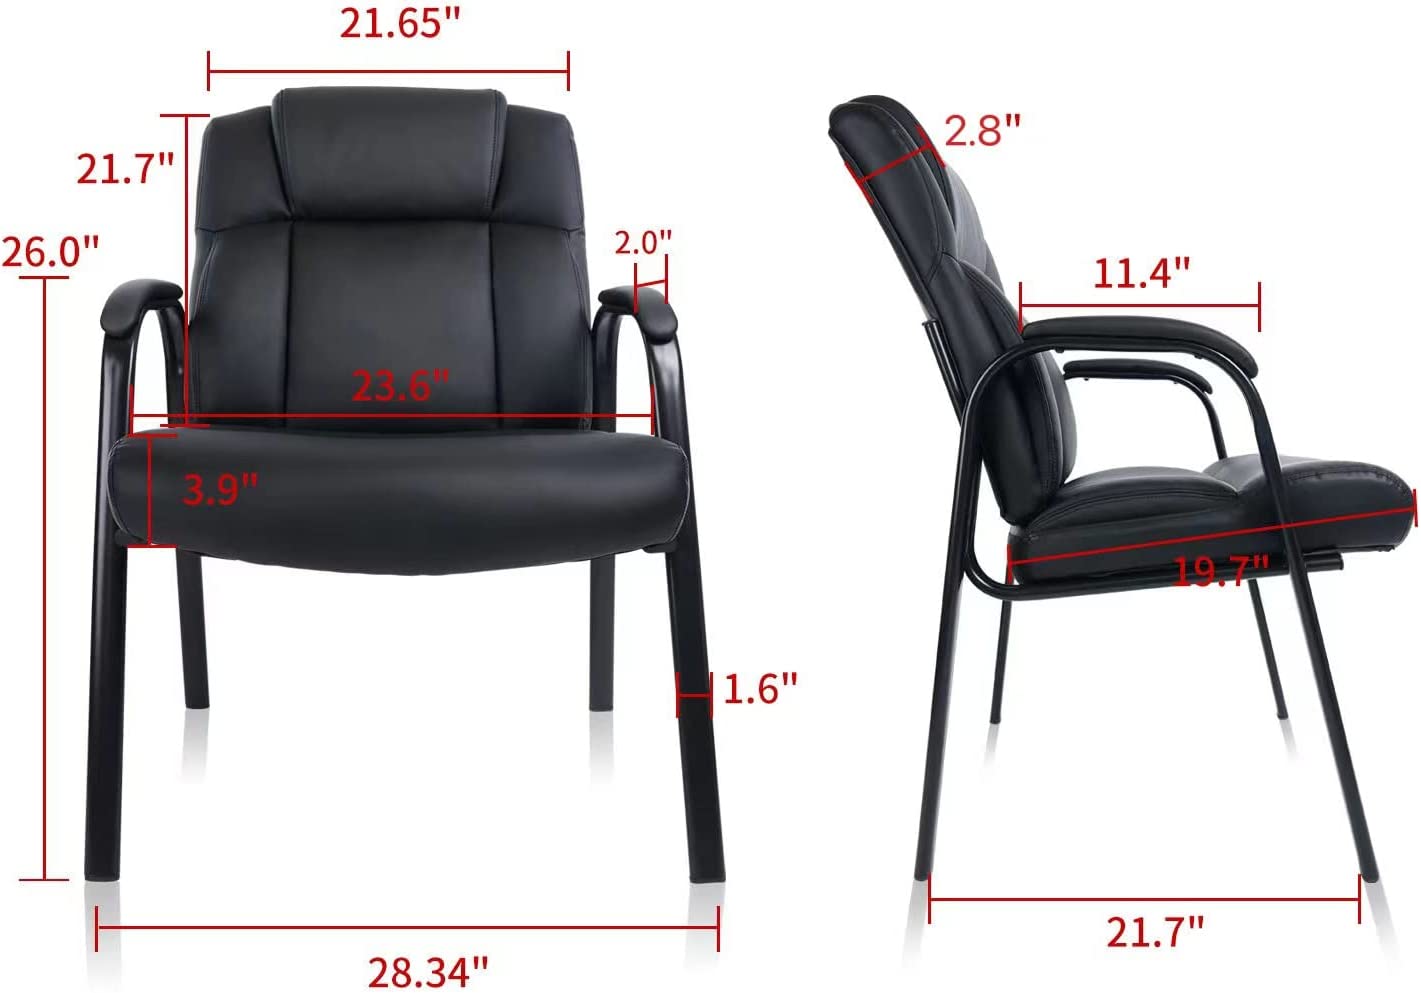 CLATINA Big & Tall 400 lb. Guest Chair, Leather Reception Chairs with Padded Arm Rest for Waiting Room Office Home and Meeting Conference-Black, 1 Pack - image 3 of 8